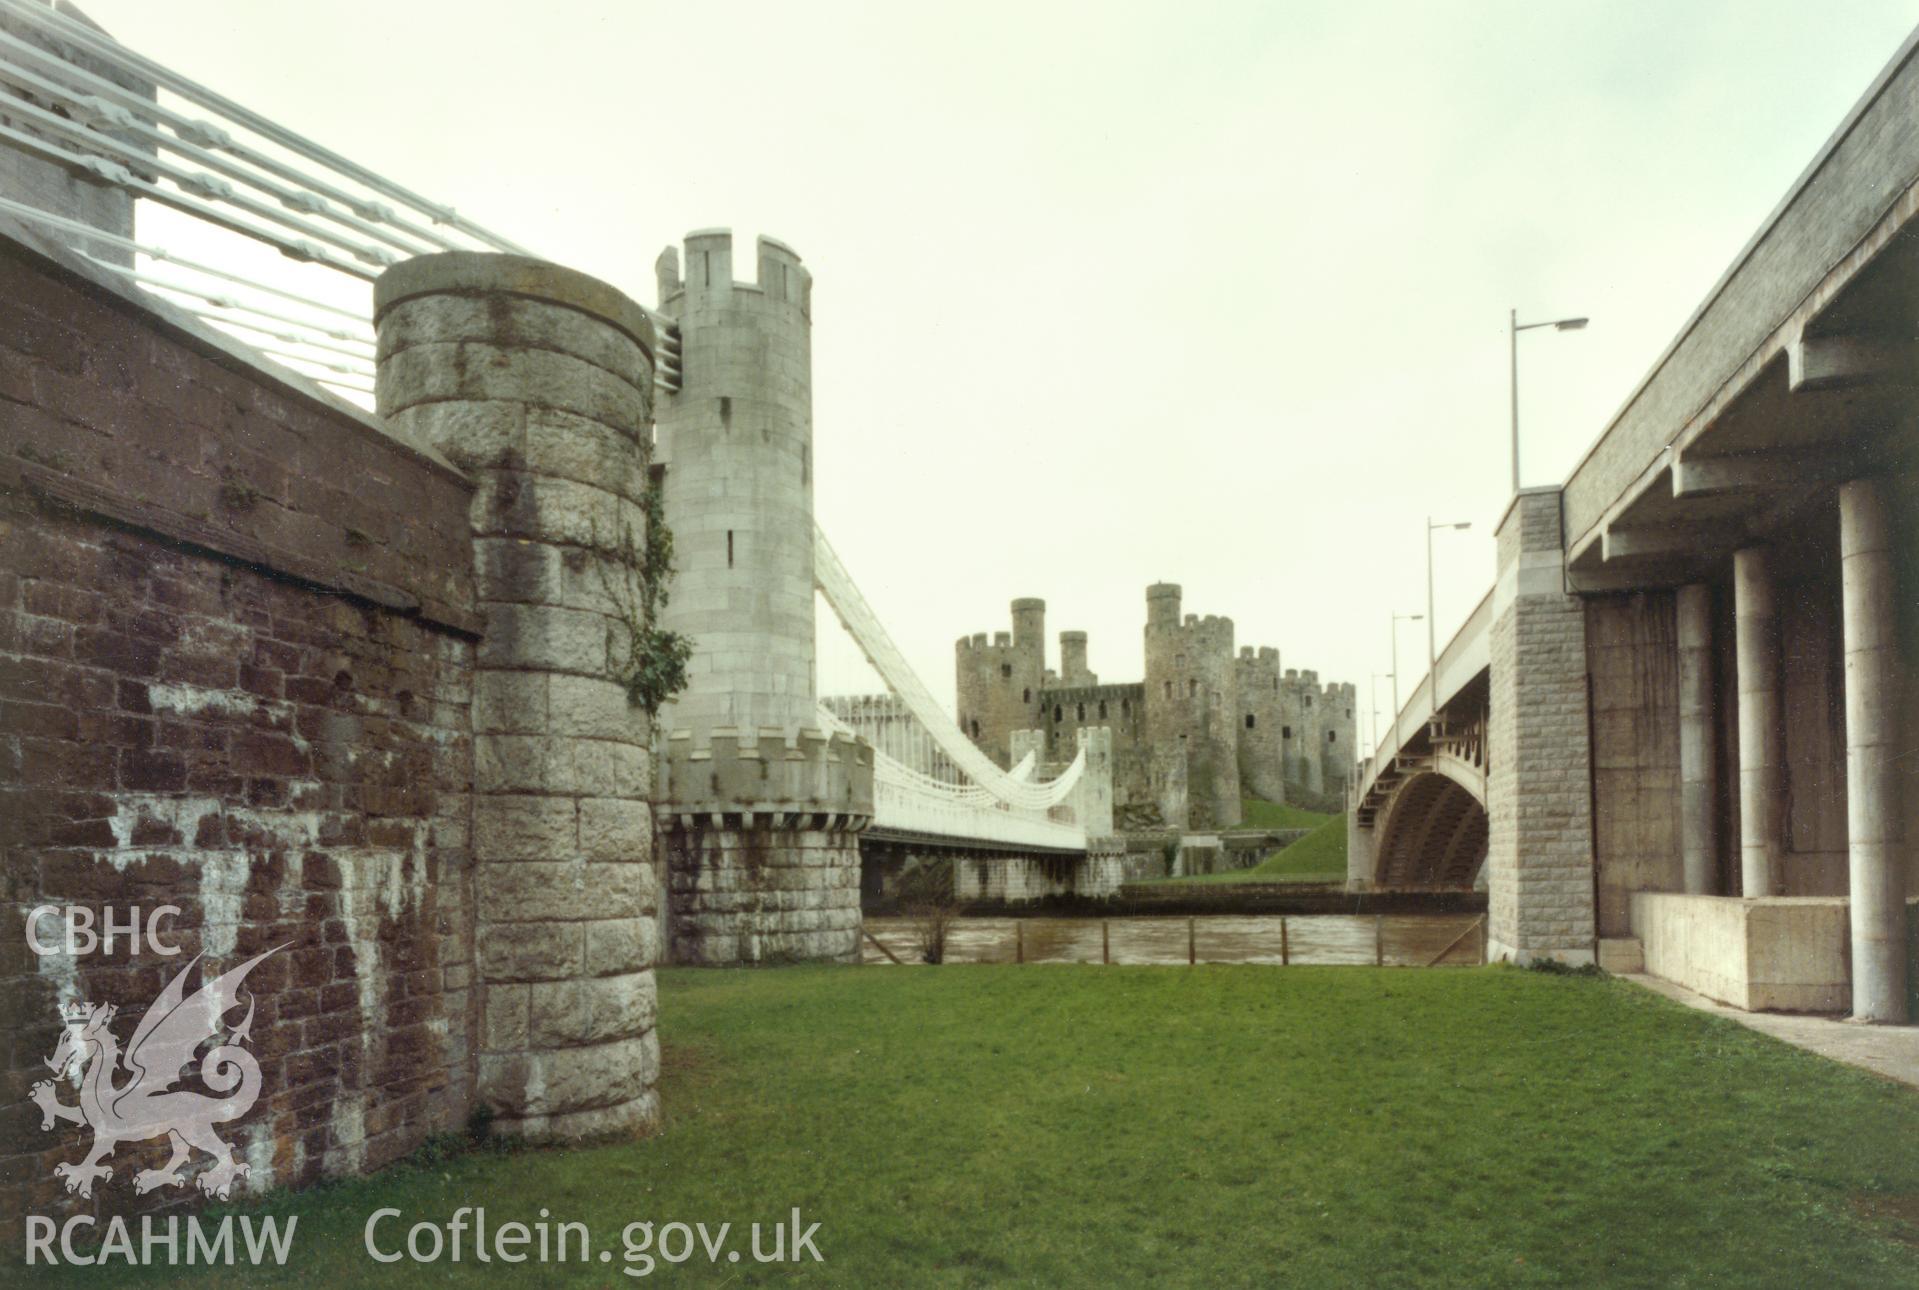 1 of a set of 27 colour prints: print showing view of Conwy castle and bridges, collated by the former Central Office of Information.